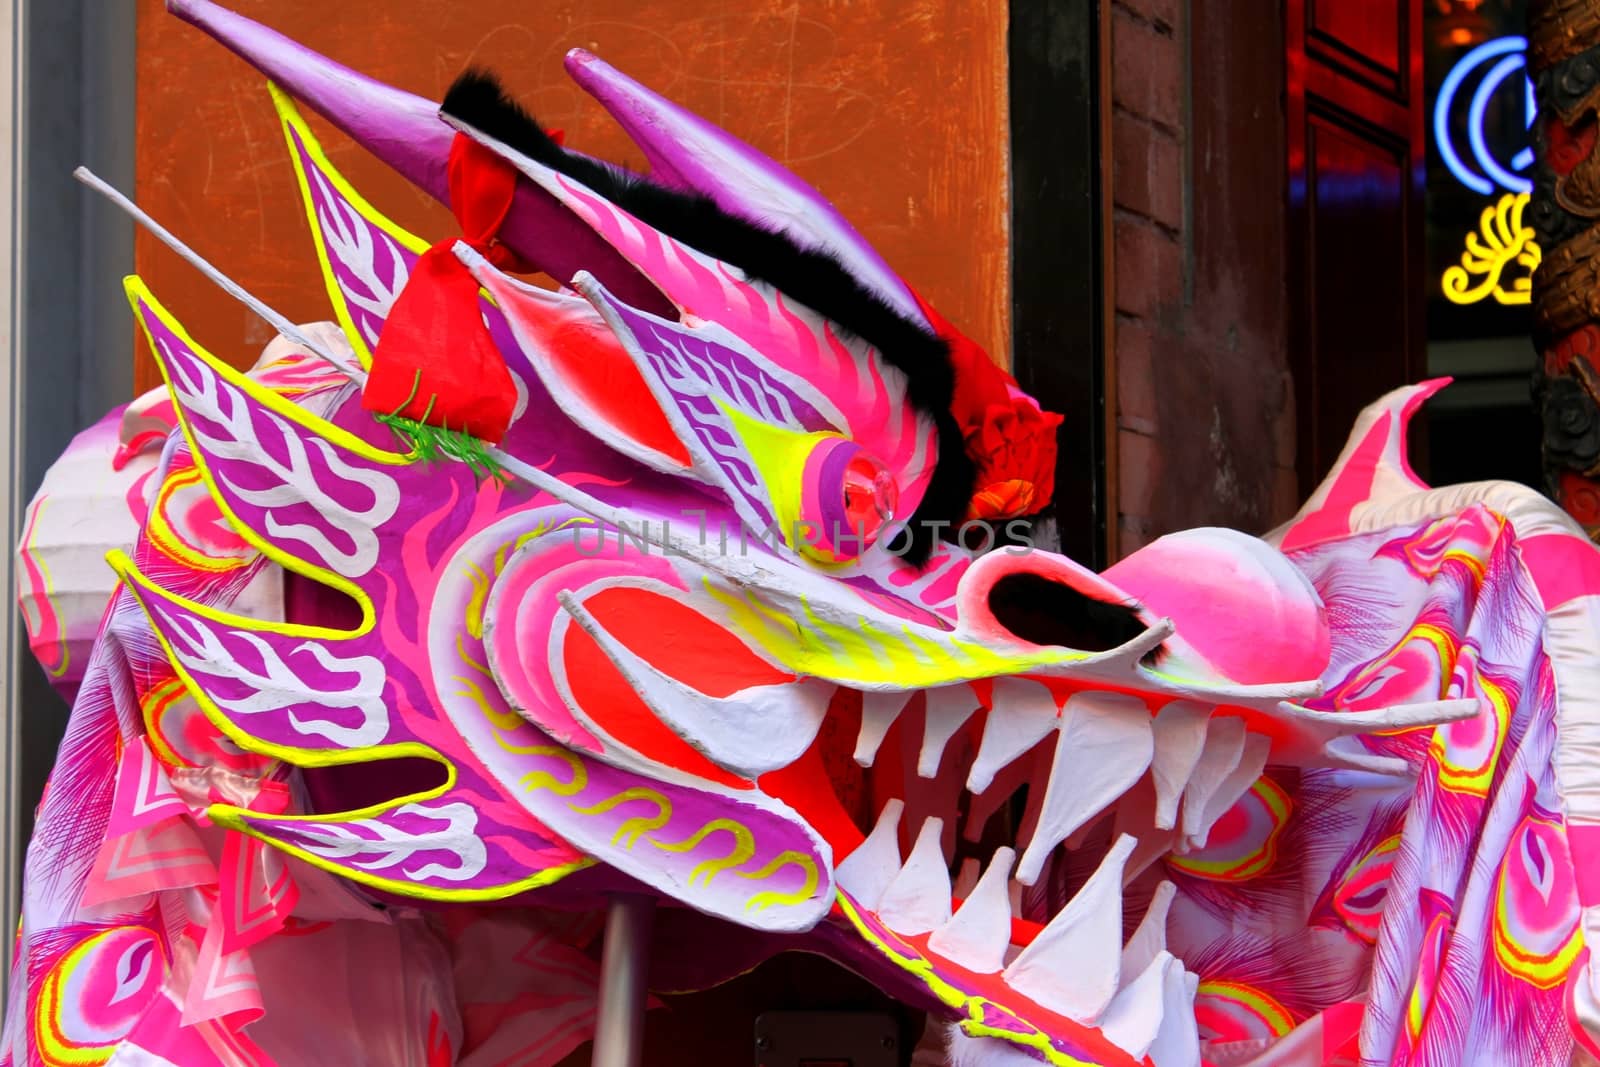 Colorful Chinese dragon used in a parade.